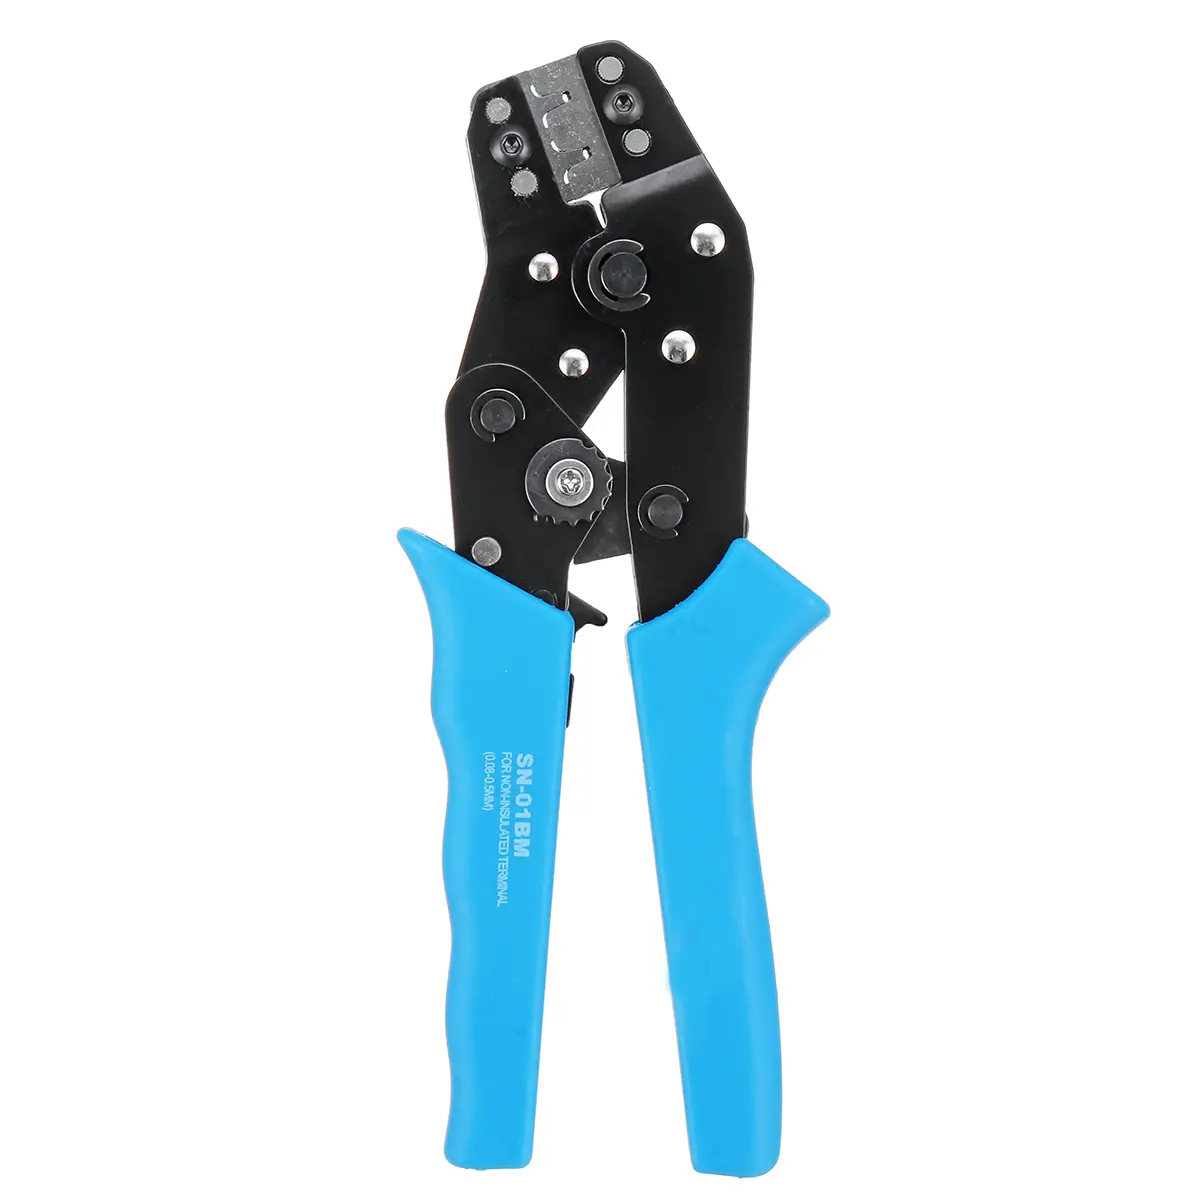 SN-01BM AWG28-20 Self-adjusting Terminal Wire Cable Crimping Pliers Tool for Dupont PH2.0 XH2.54 KF2510 JST Molex D-SUB Terminal